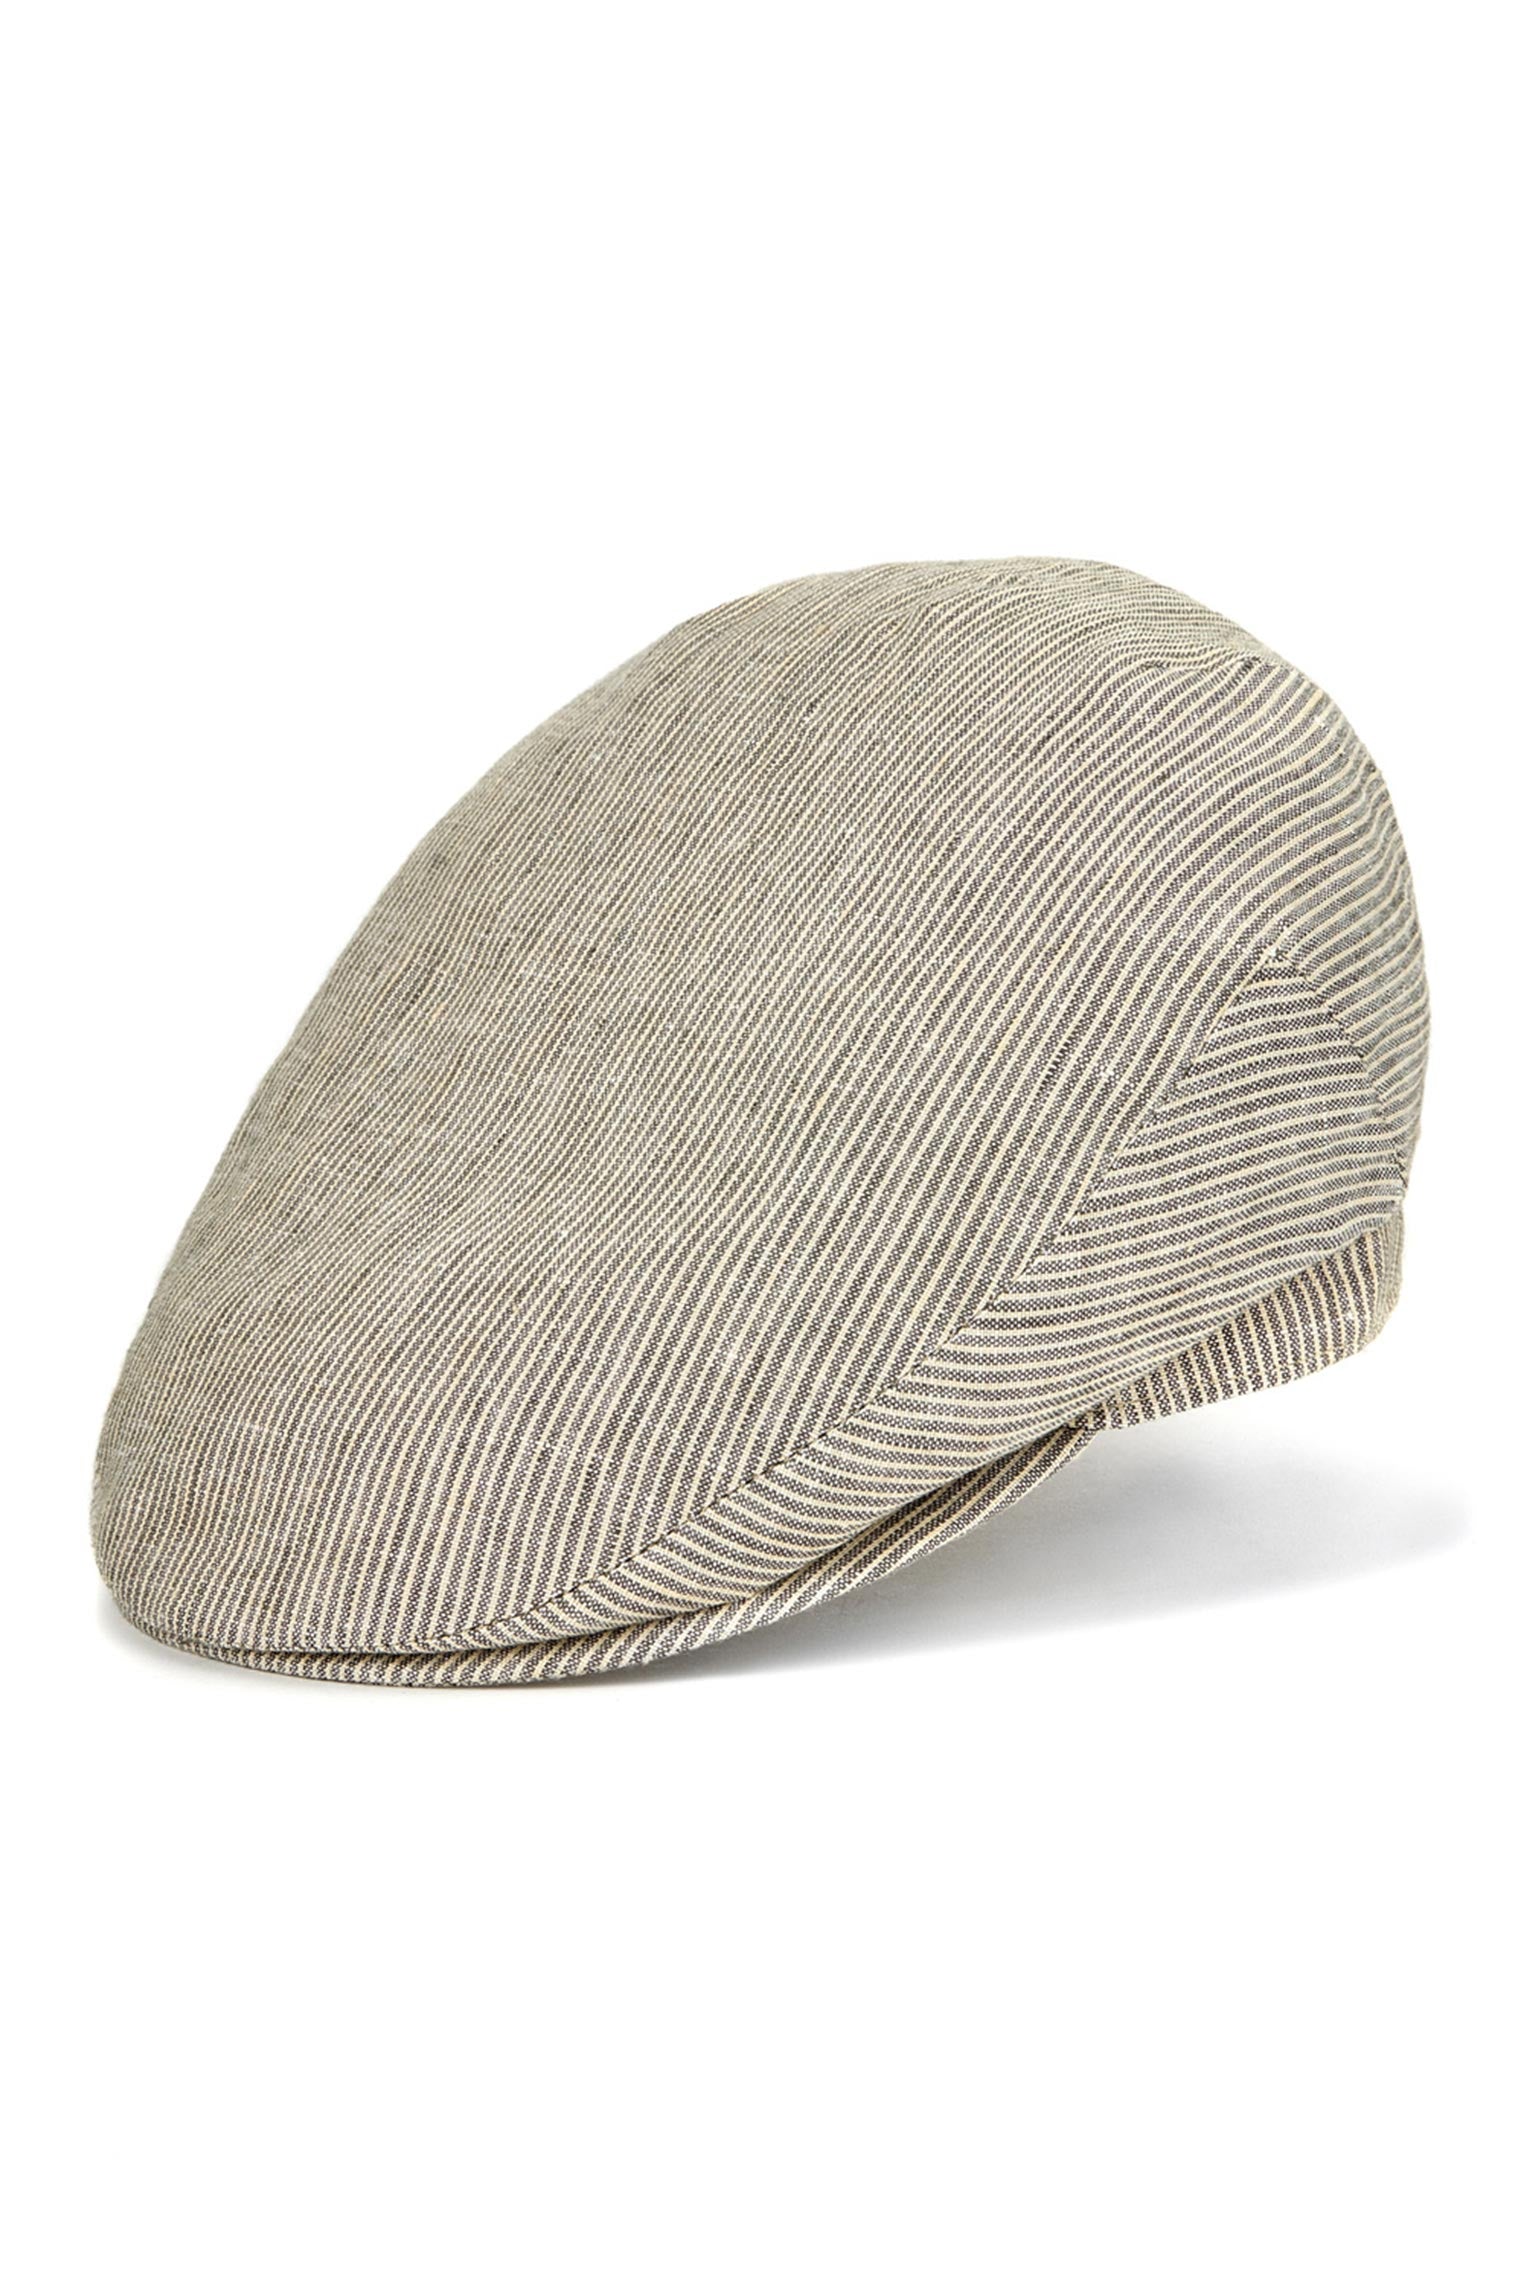 Cannes Linen Flat Cap - Hats for Oval Face Shapes - Lock & Co. Hatters London UK